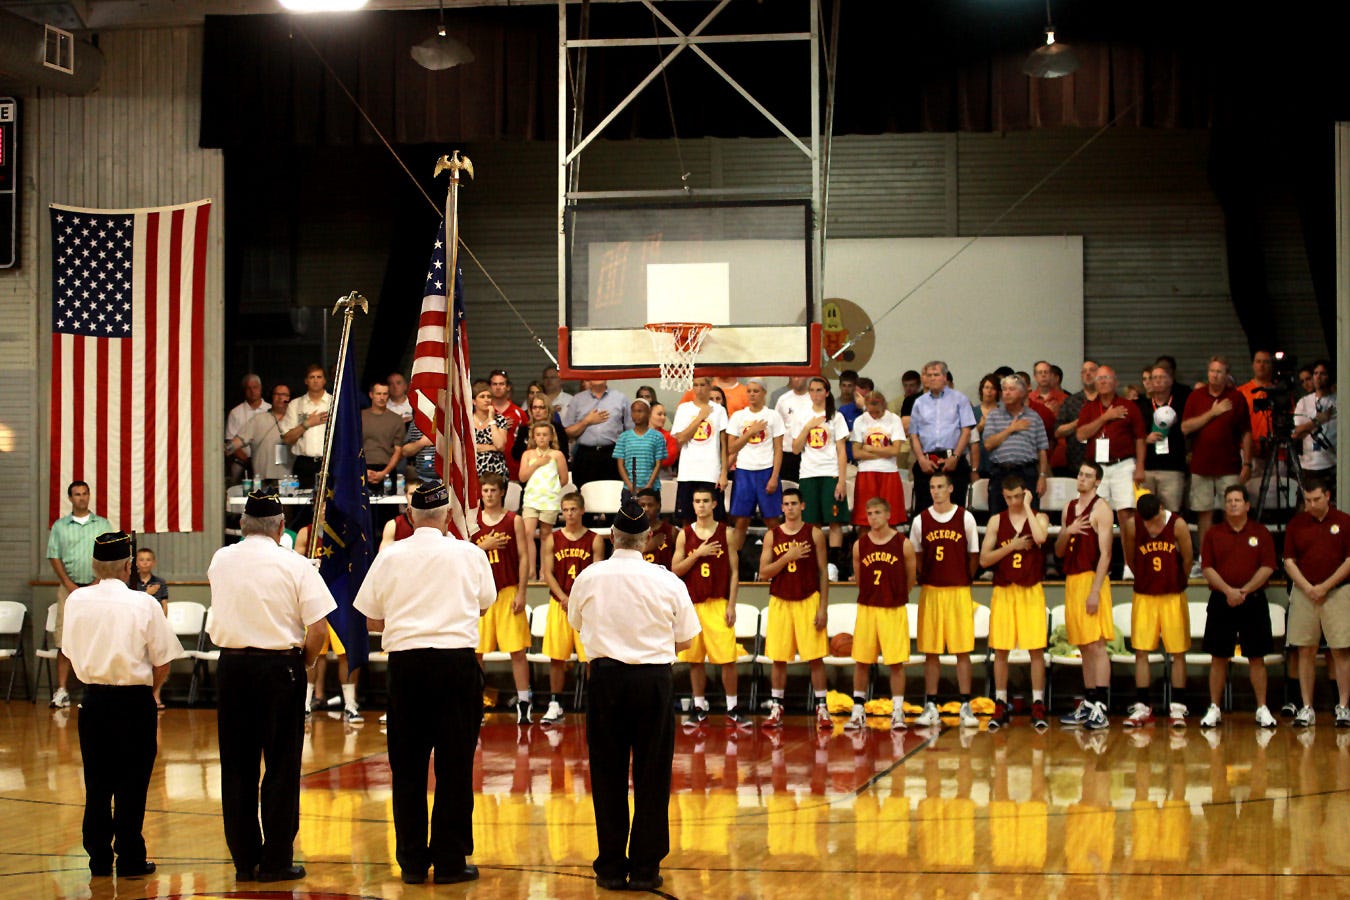 The Knightstown American Legion Post 152 Honor Guard presents the colors prior to tip-off at the 2011 Hoosiers Reunion All-Star Classic Doubleheader. Located on Main Street (U.S. 40) in Knightstown, American Legion Post 152 is one of few area posts to offer honor guard services at ball games and veteran funerals.